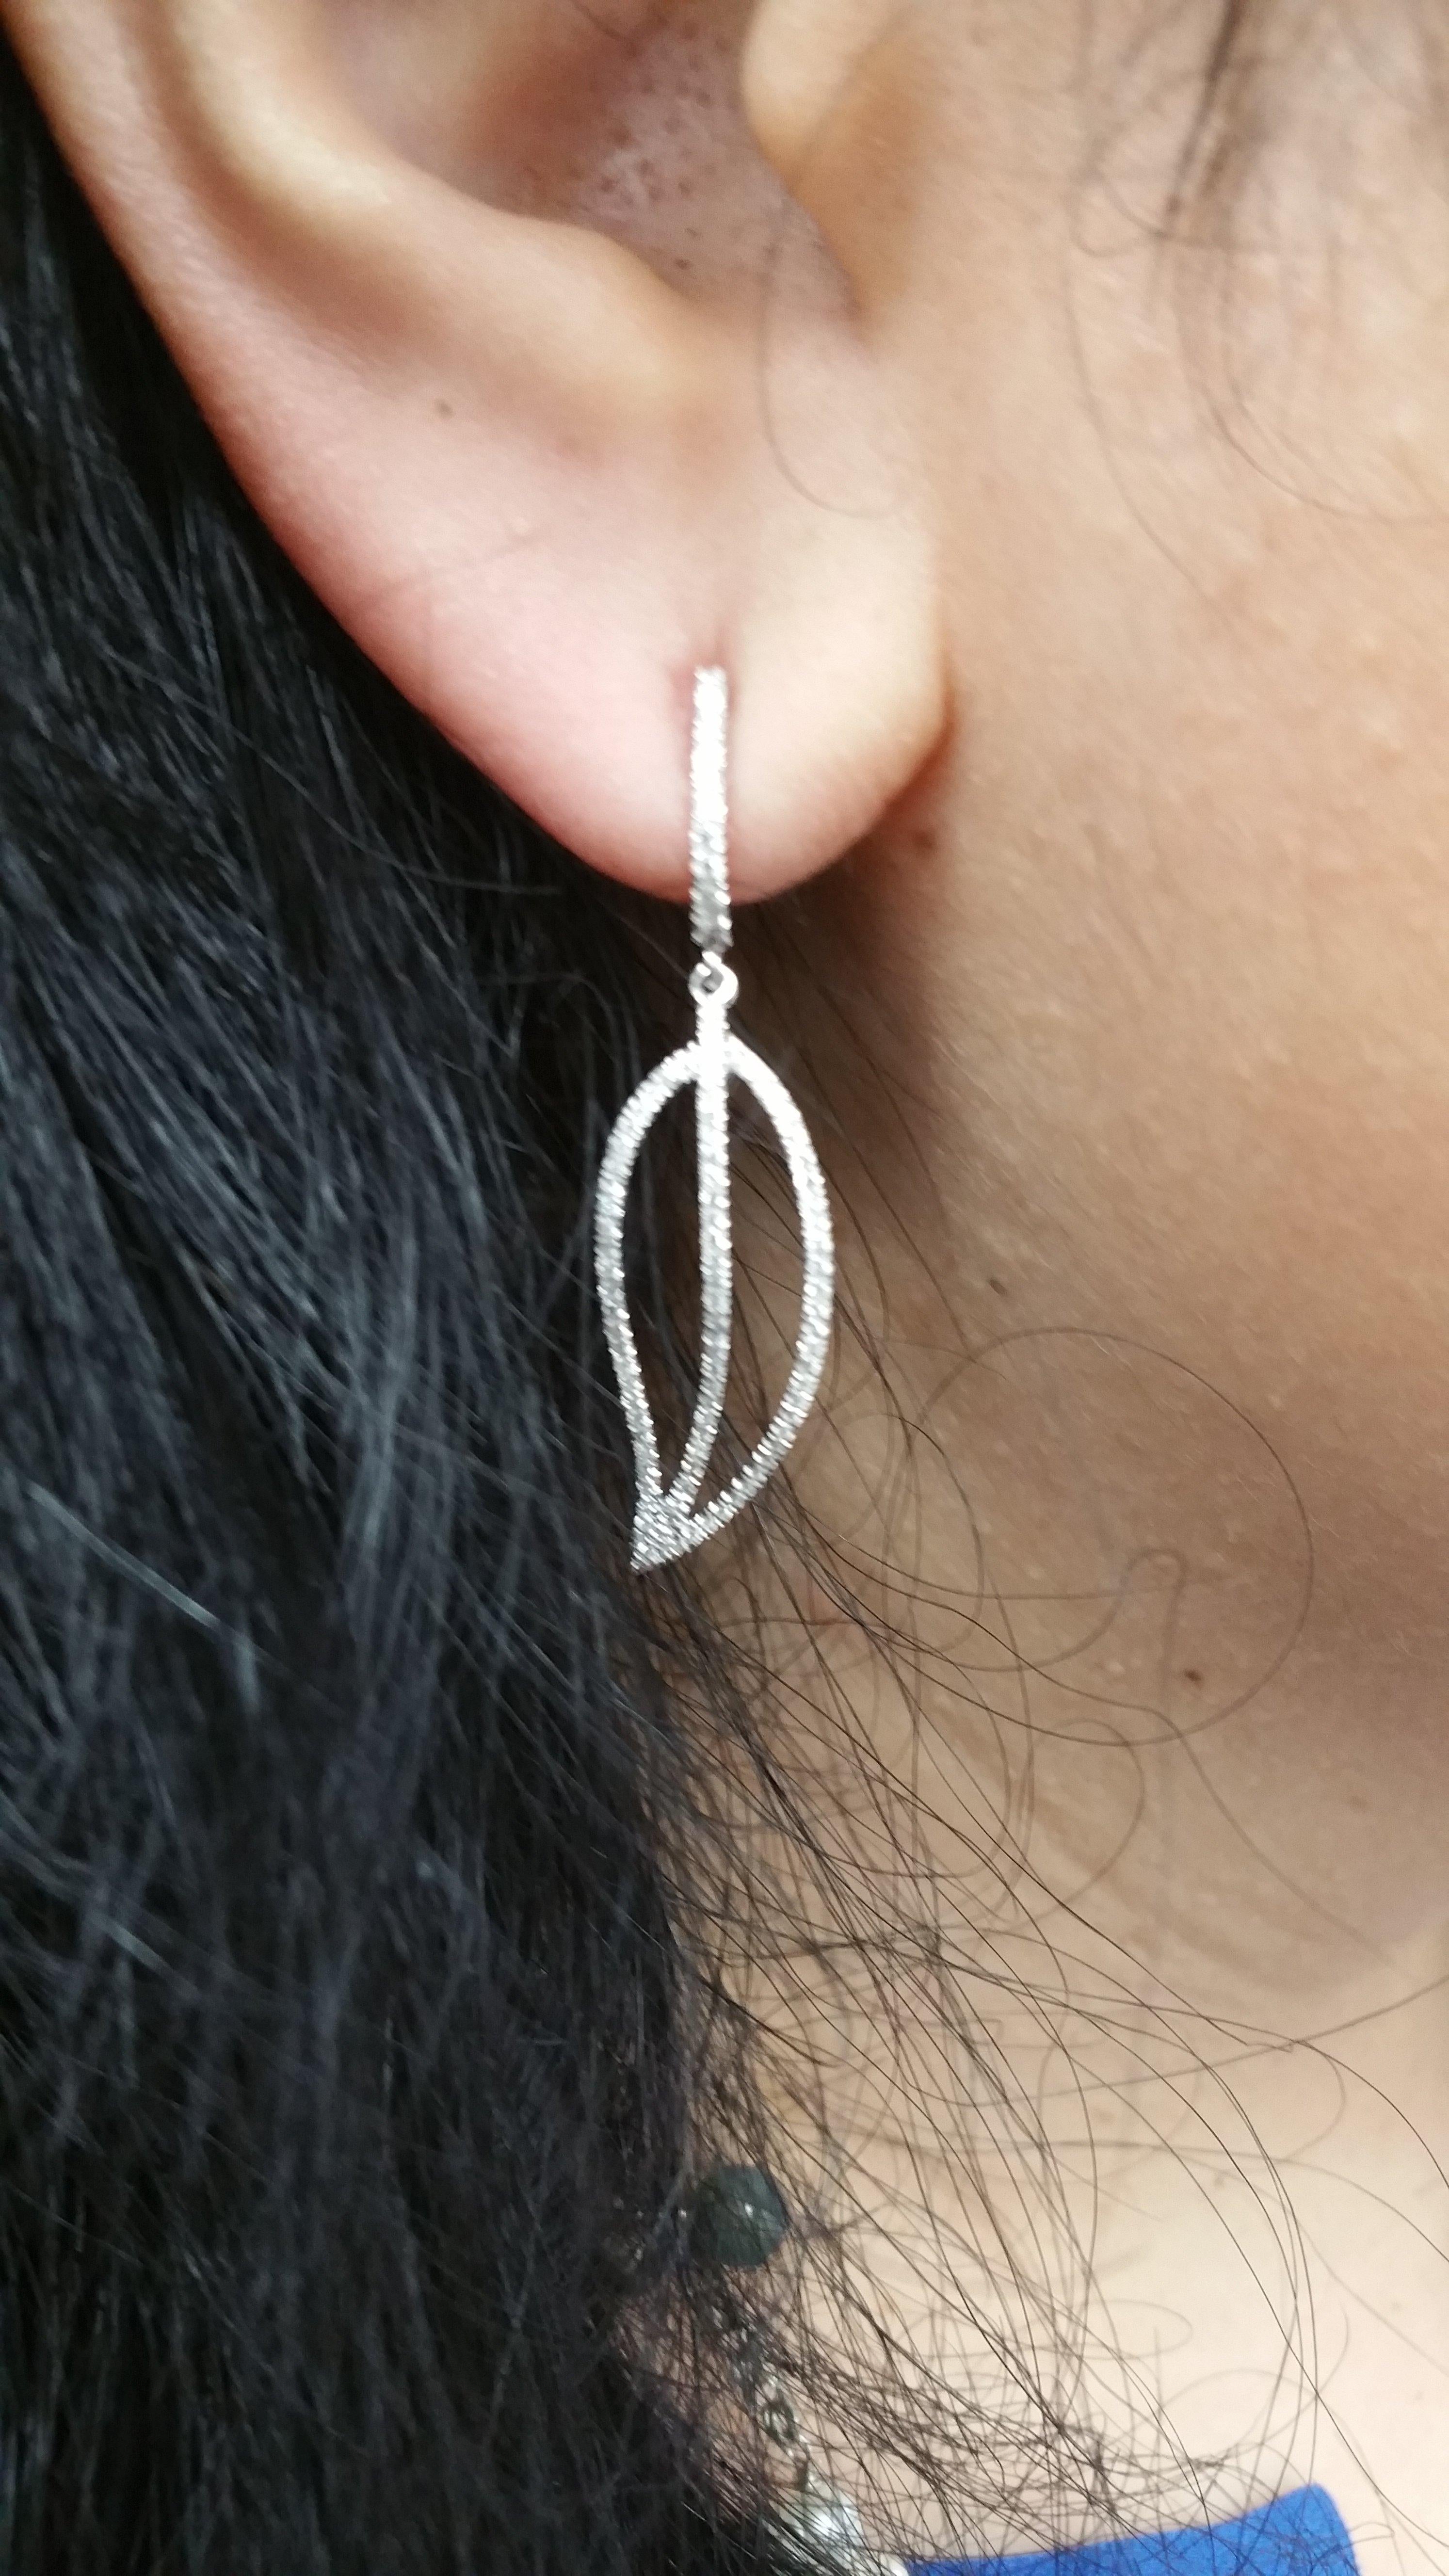 Beautiful Earrings featuring:
18k white gold
0.60 total cts. weights
metal weights: 3.6 grams
diamond shape: rounds
diamond counts: 188
diamond clarity : SI1
diamond color: G+
the earrings are 0.5 